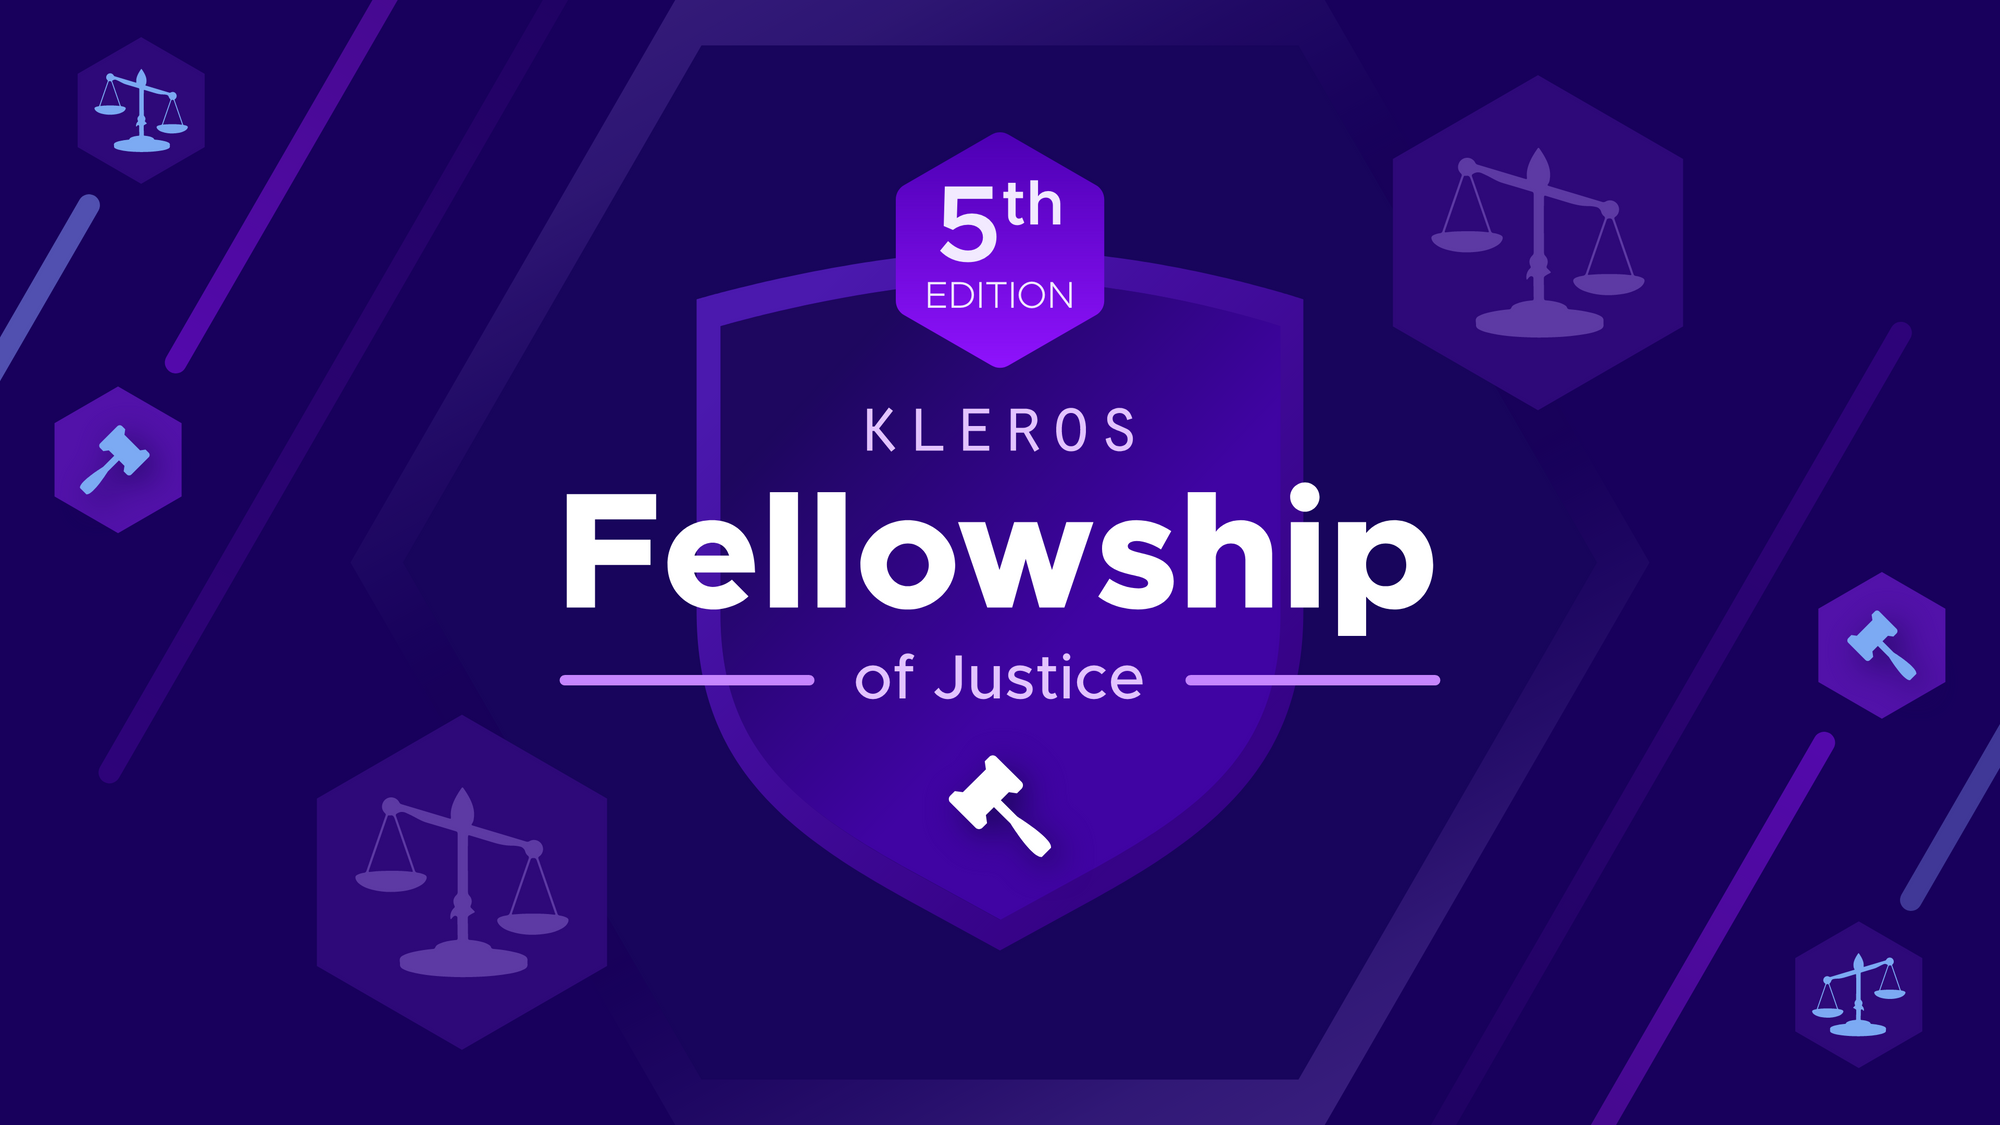 The Kleros Fellowship of Justice, 5th Generation: Applications Open